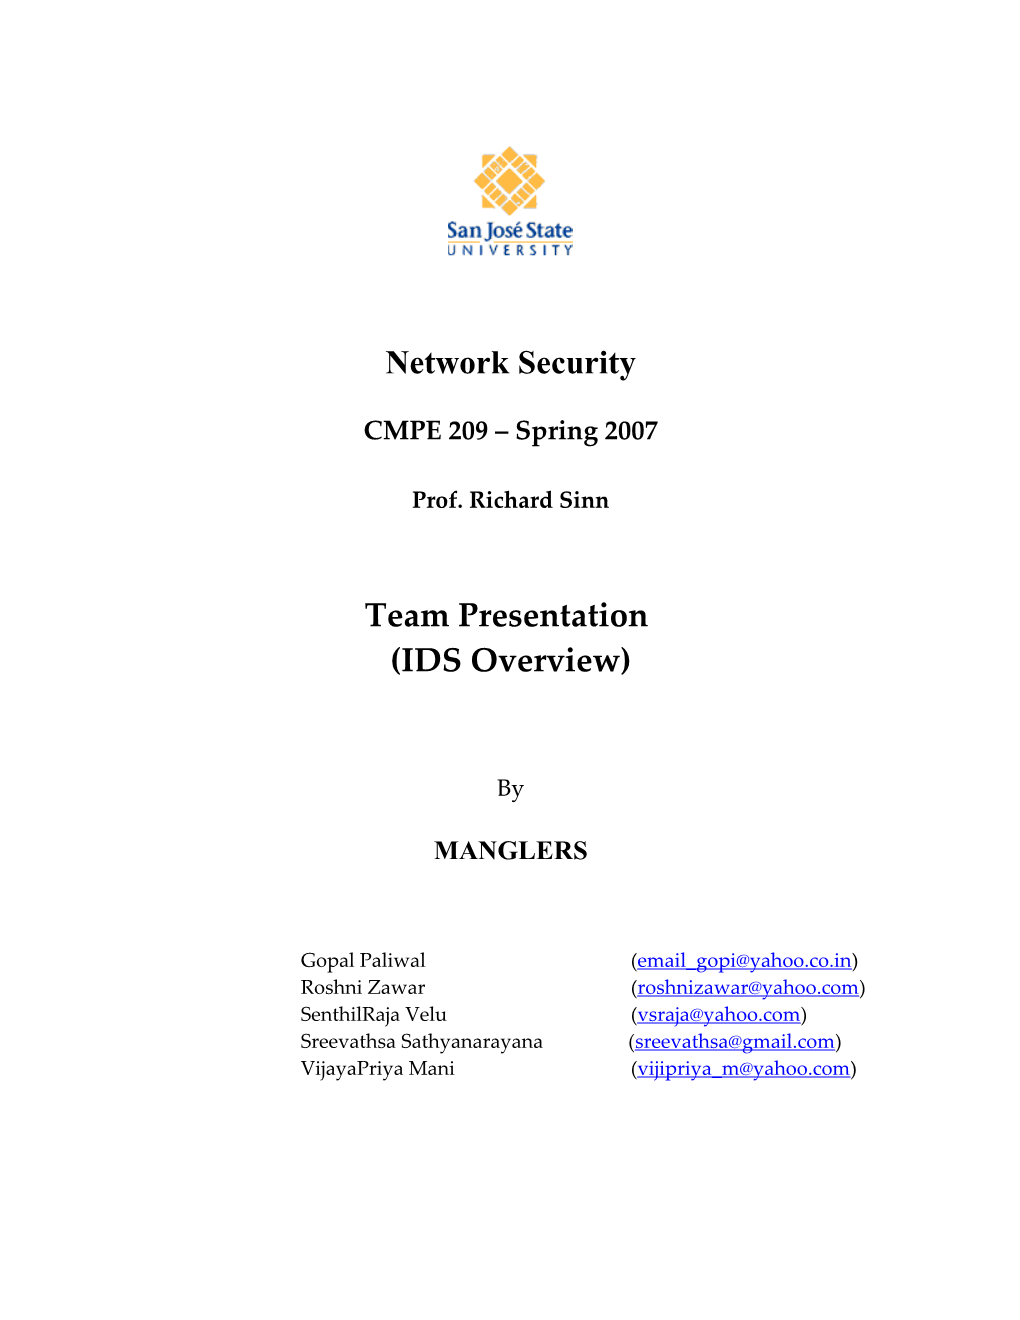 Intrusion Detection System Overview